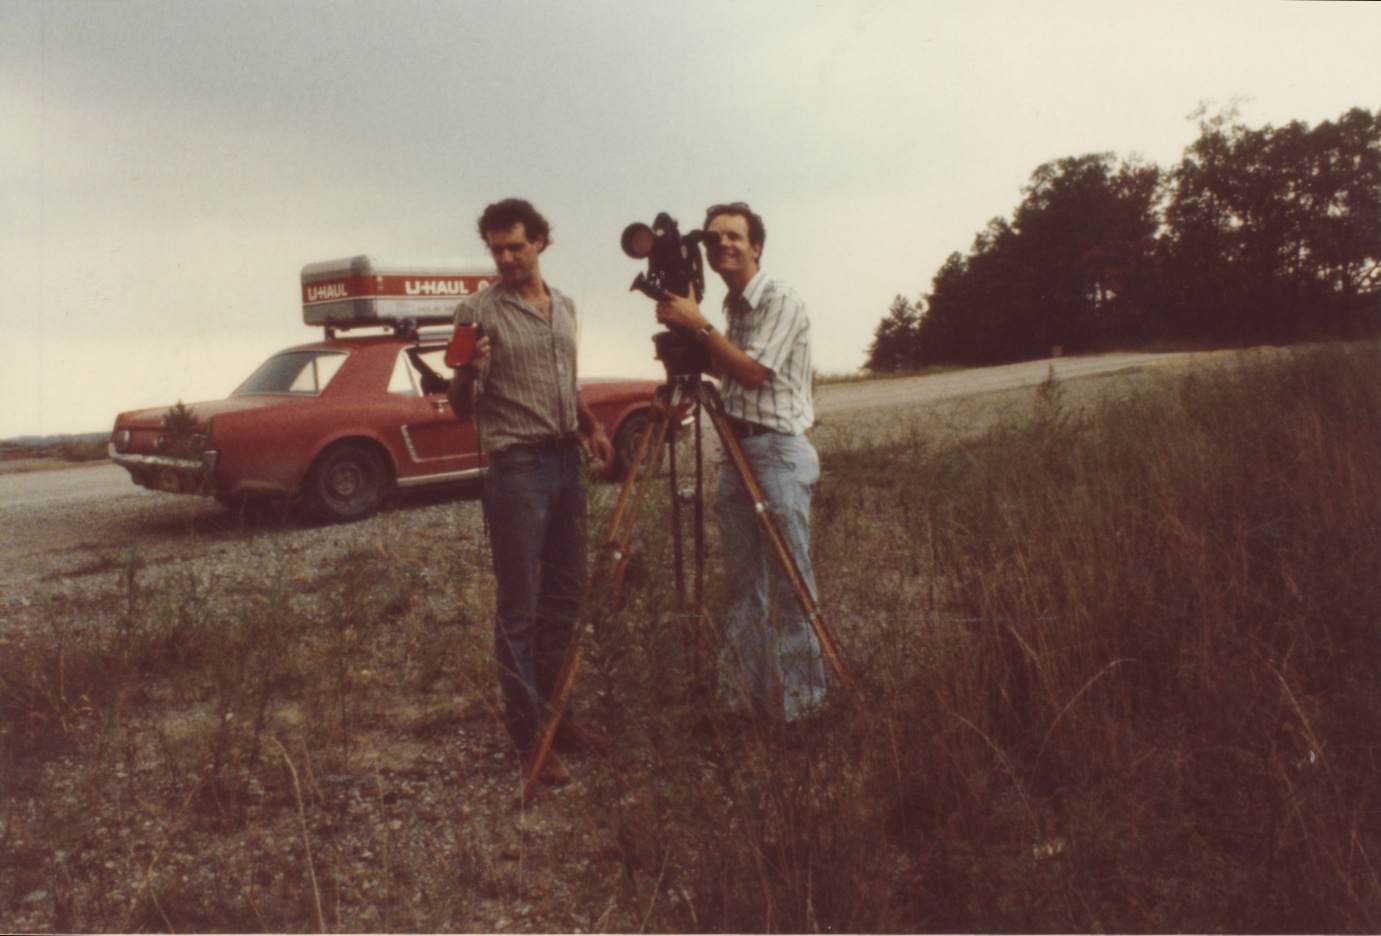 Director Ross Spears (behind camera) and cinematographer Anthony Forma during the filming of The Electric Valley in East Tennessee in 1982. Red Mustang in bg.